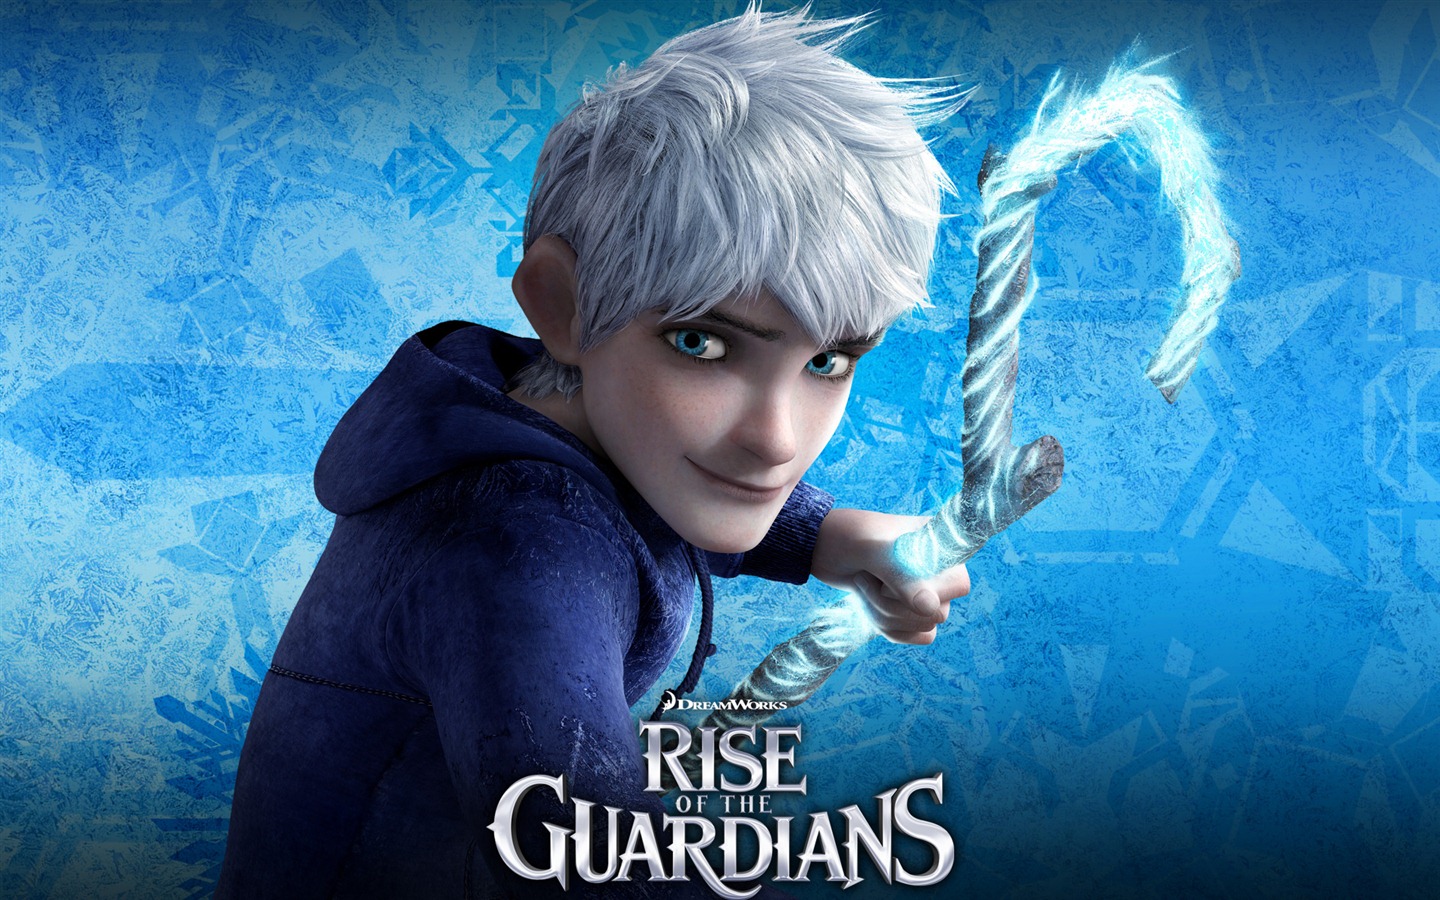 Rise of the Guardians HD Wallpaper #2 - 1440x900